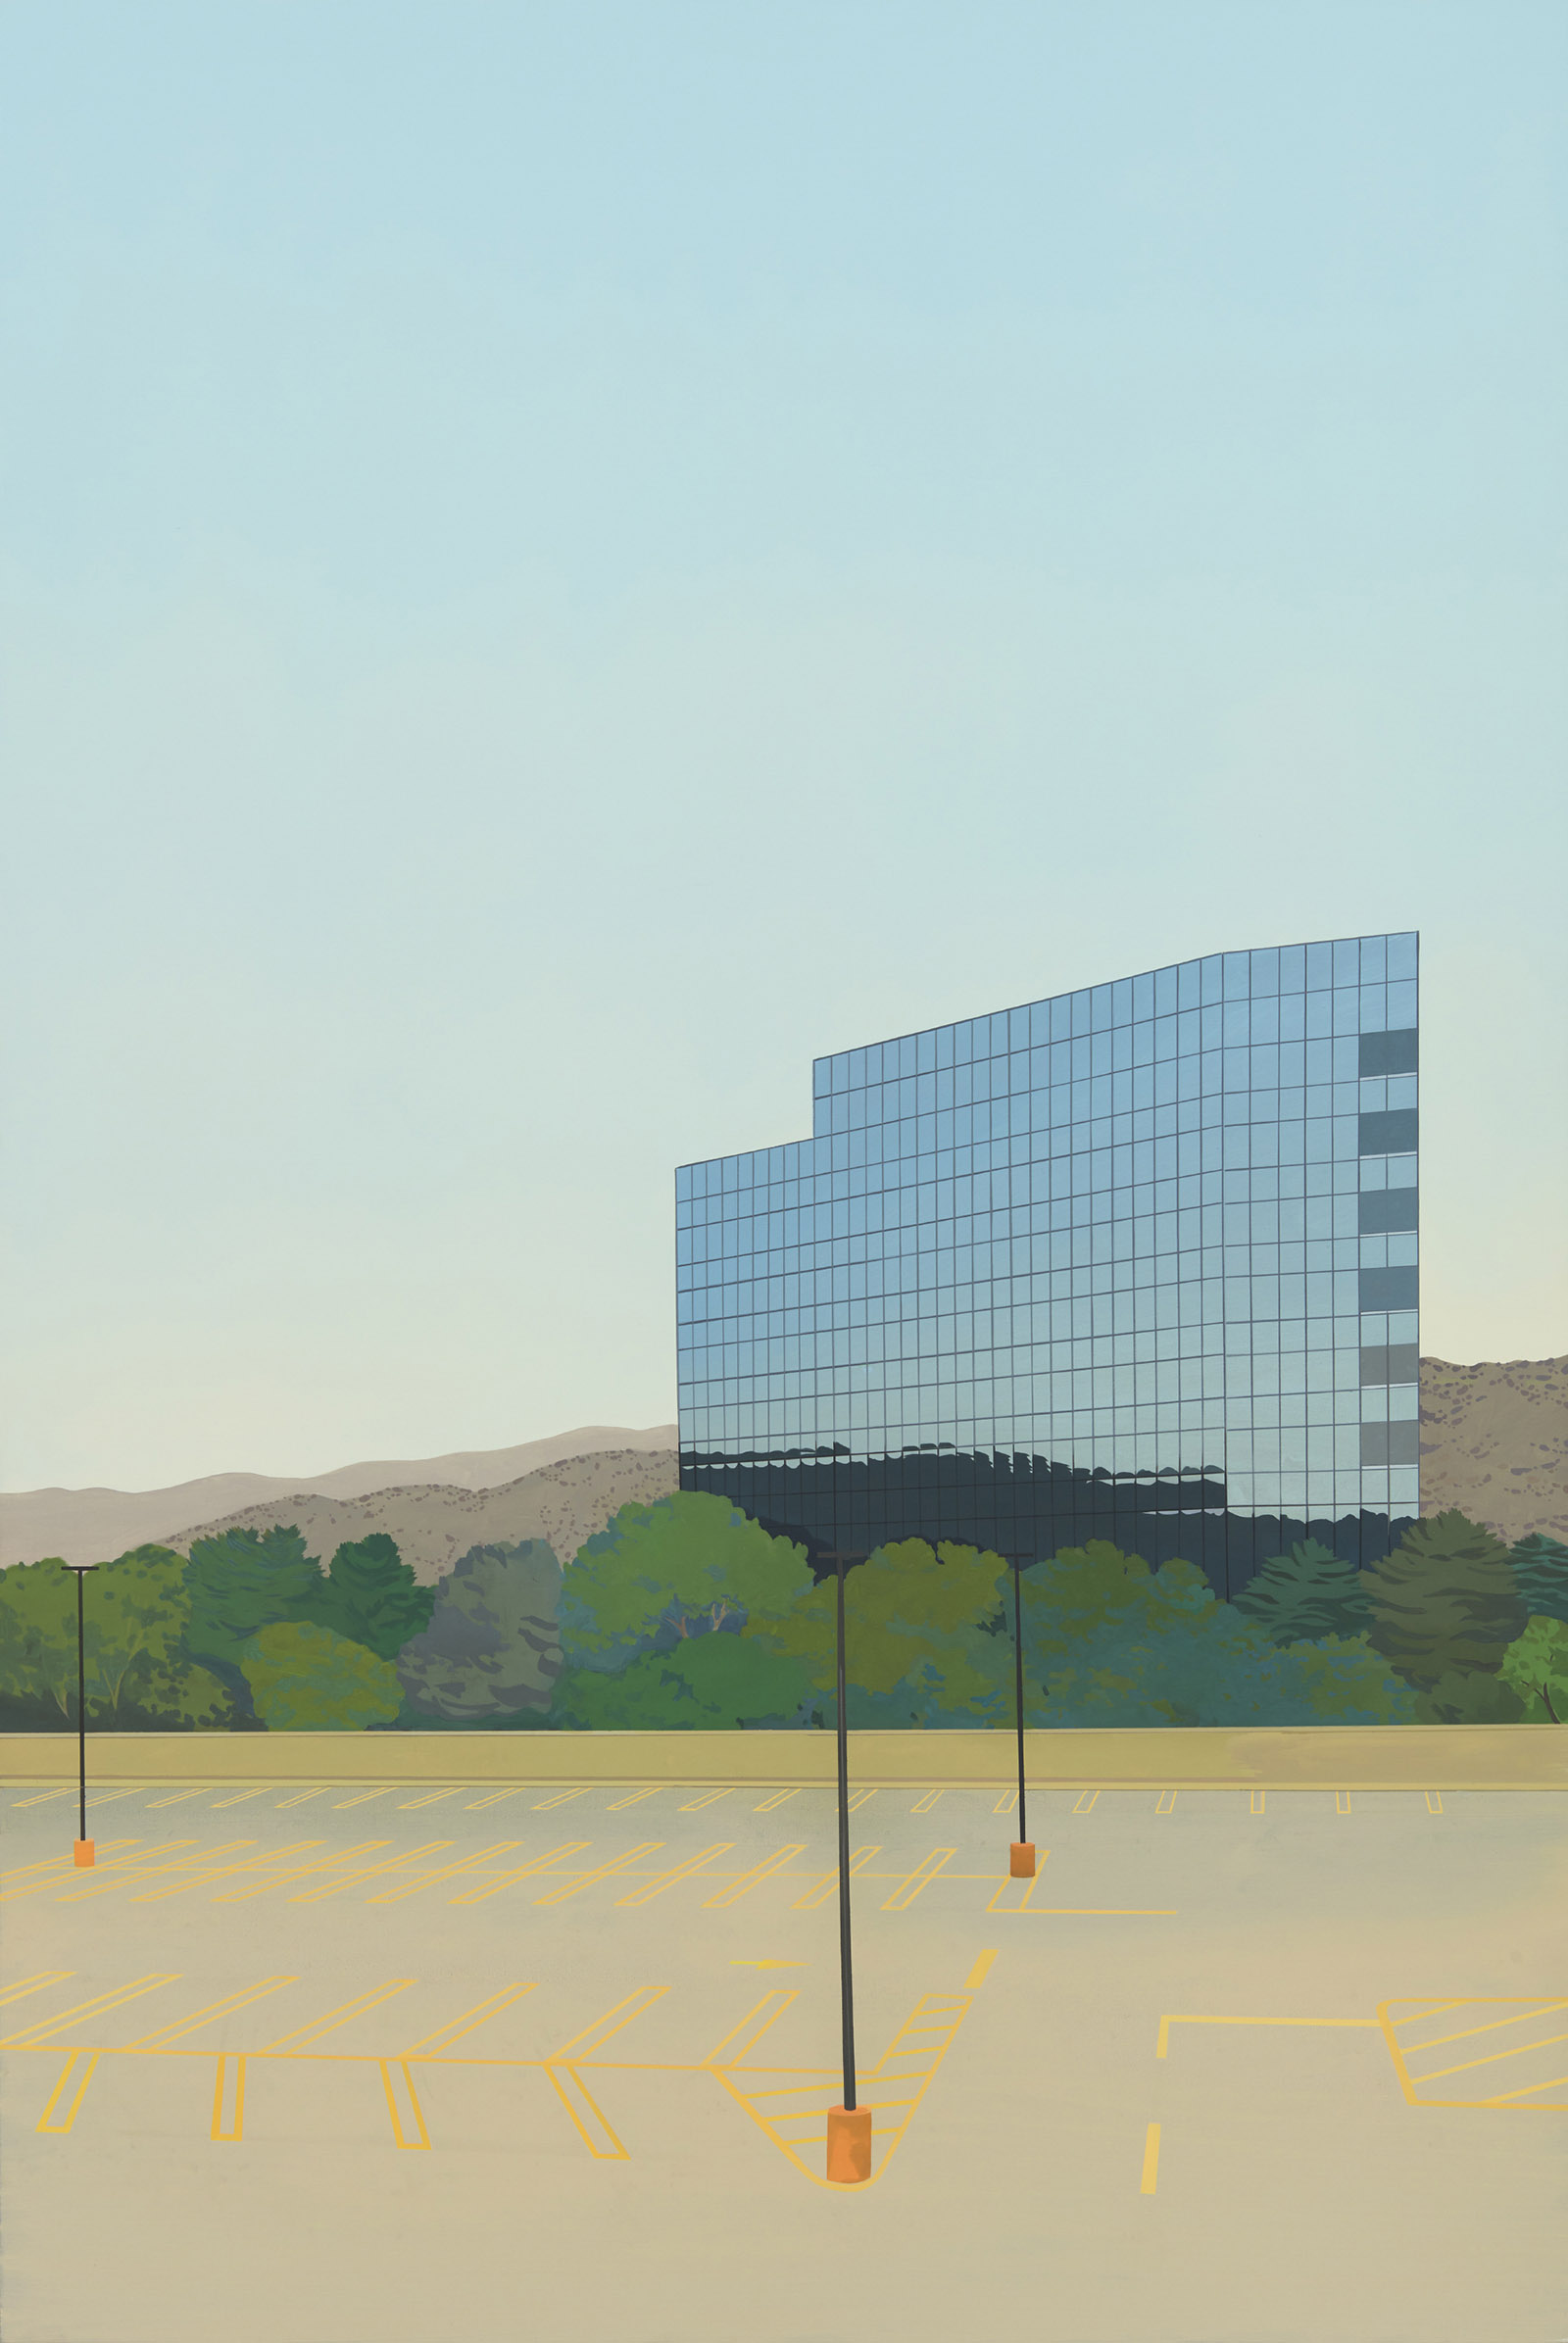 An empty parking lot with trees and a glass office building in the background